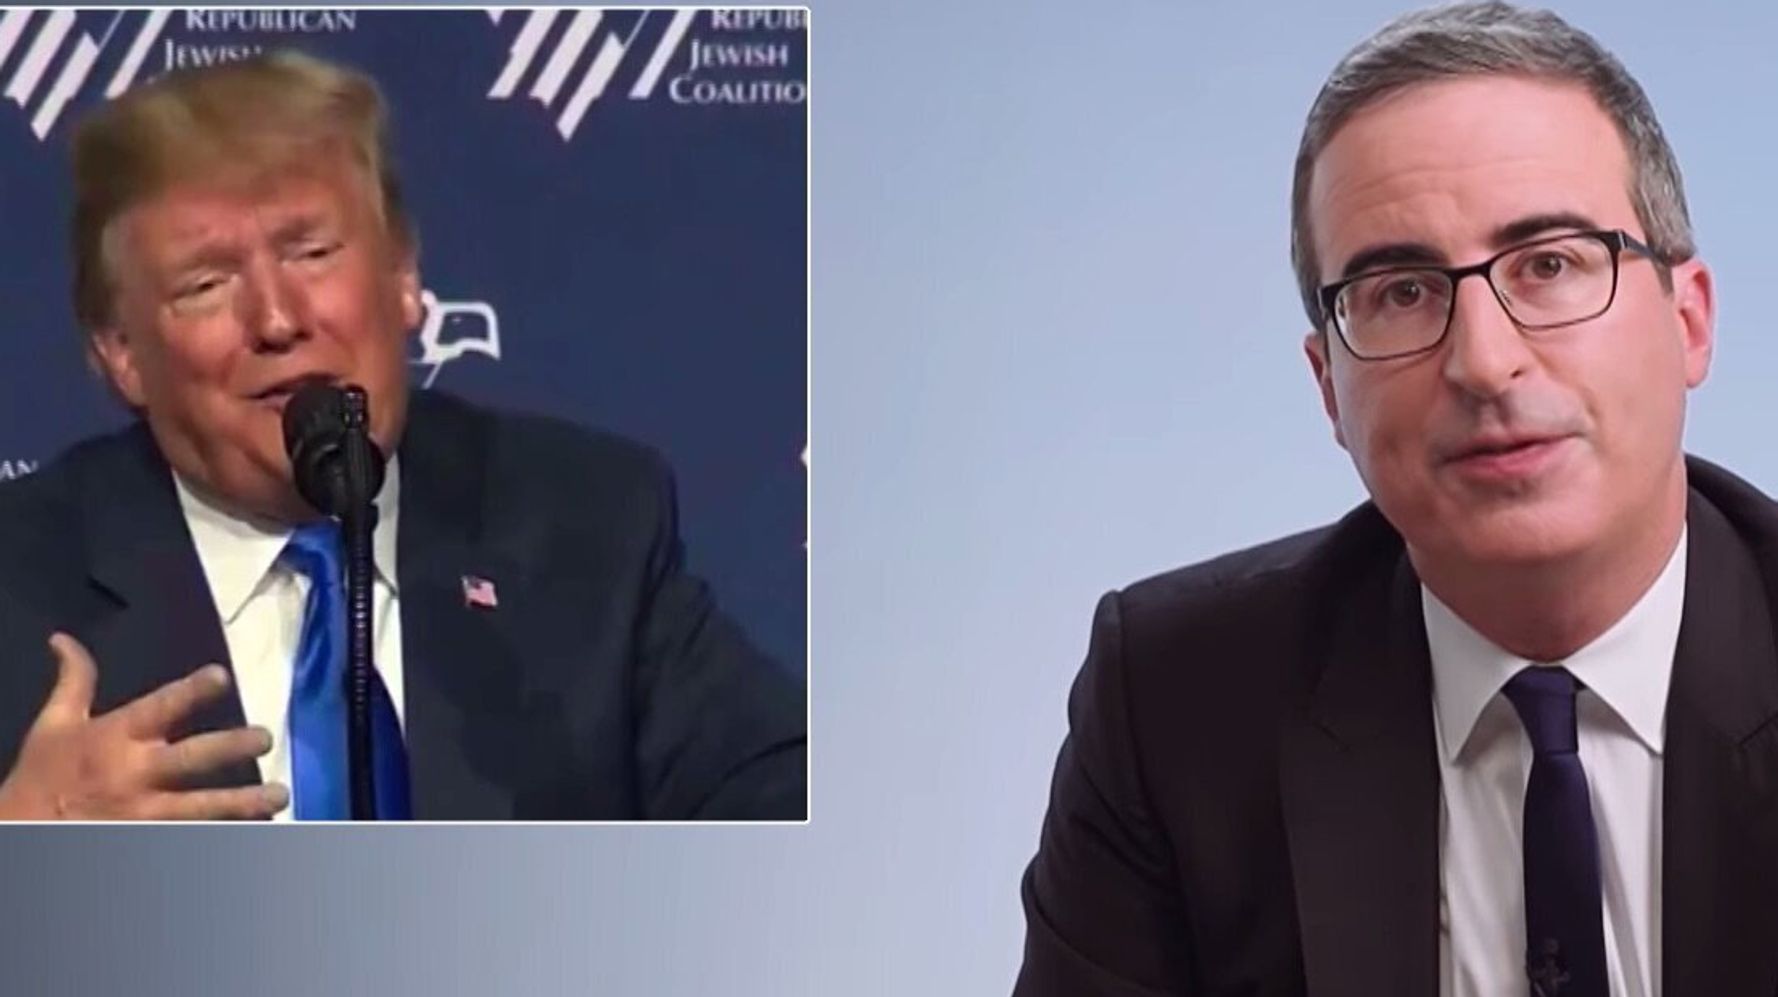 John Oliver Nails The Really Sad Part Of Trump’s Final Debate Performance